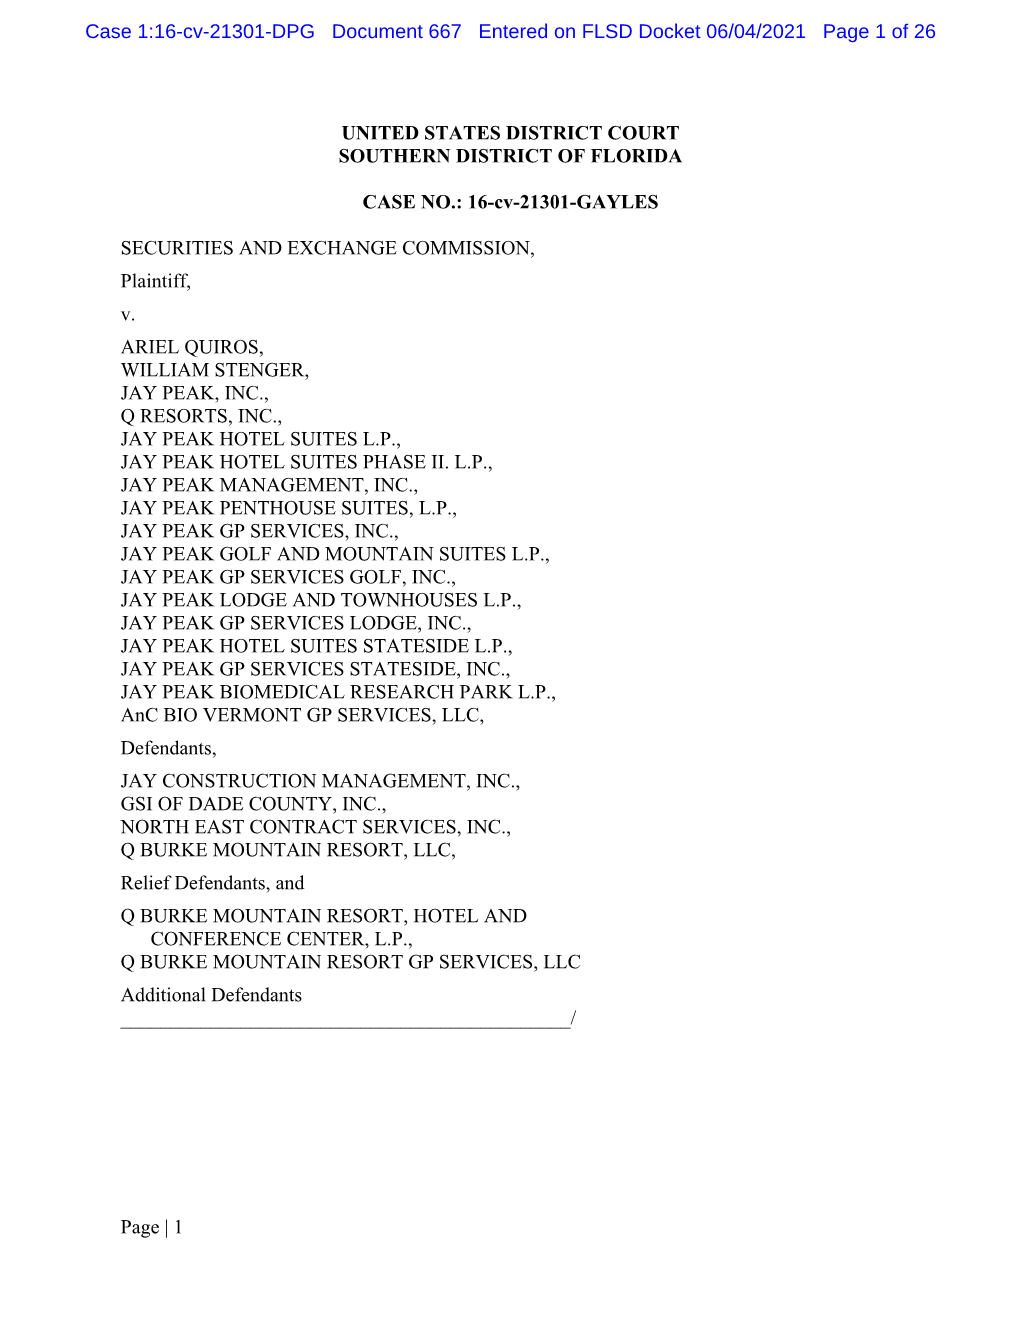 Page | 1 UNITED STATES DISTRICT COURT